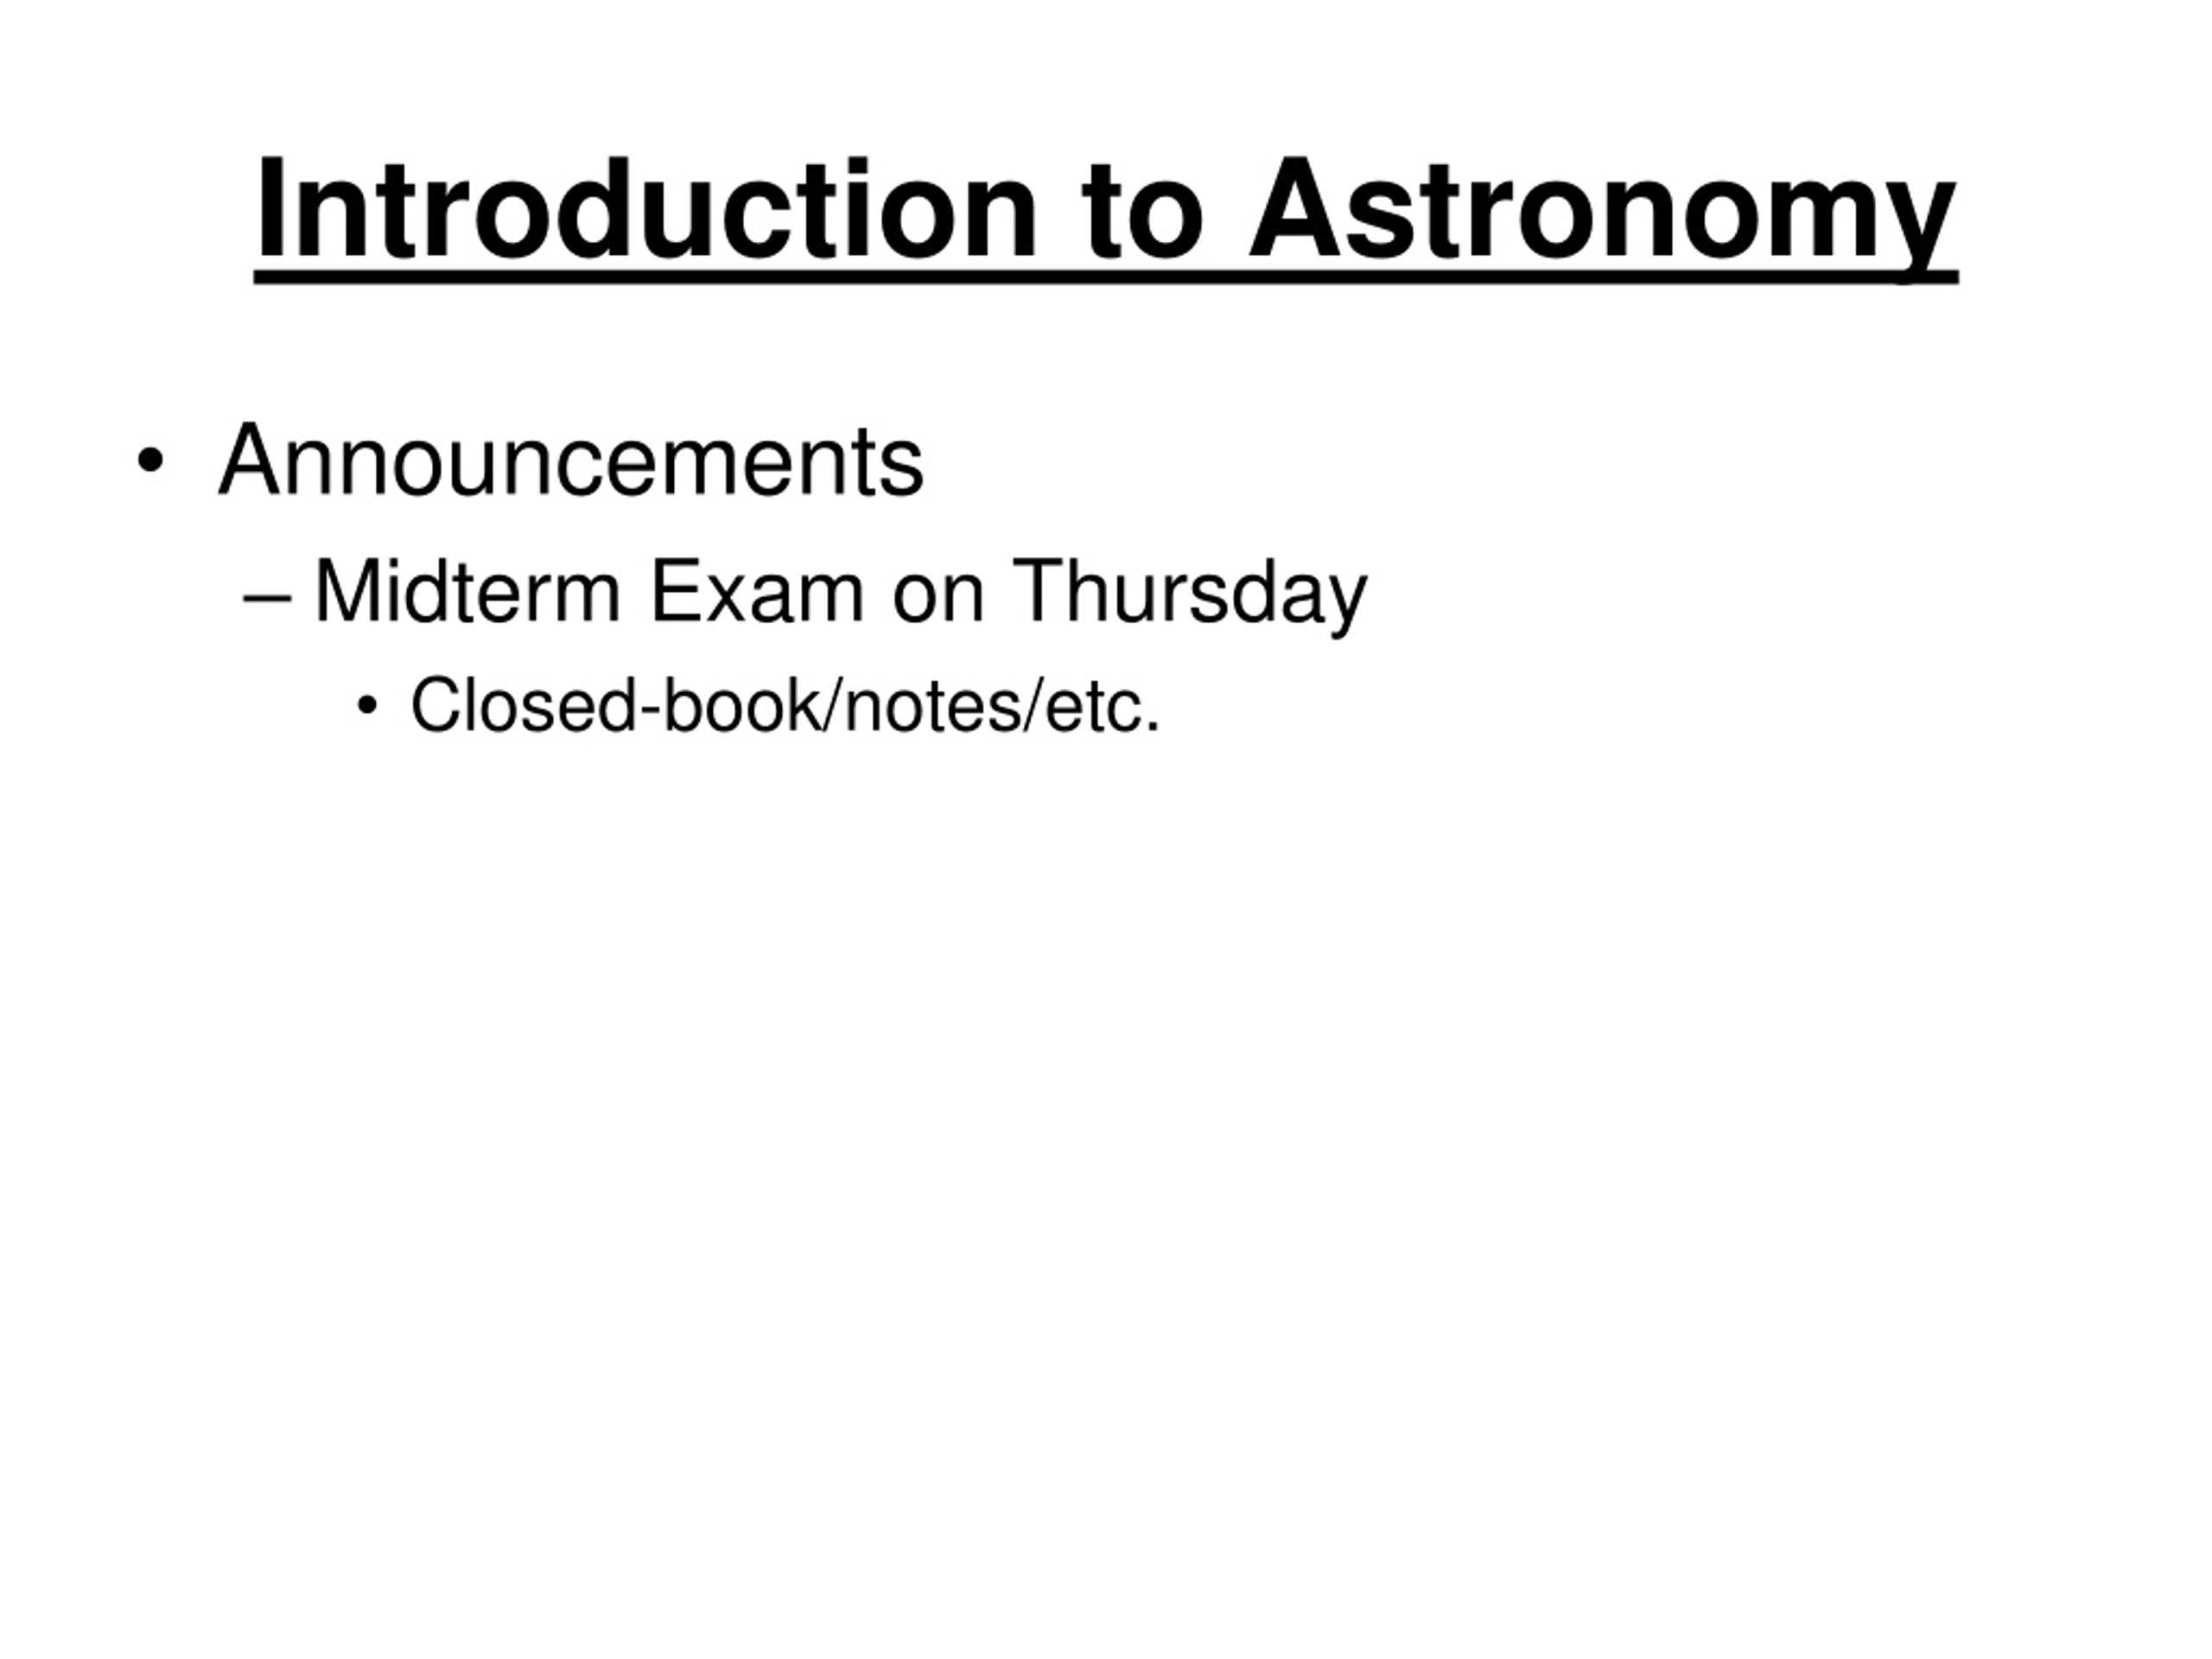 Ppt Introduction To Astronomy Powerpoint Presentation Free Download Id8772421 5353